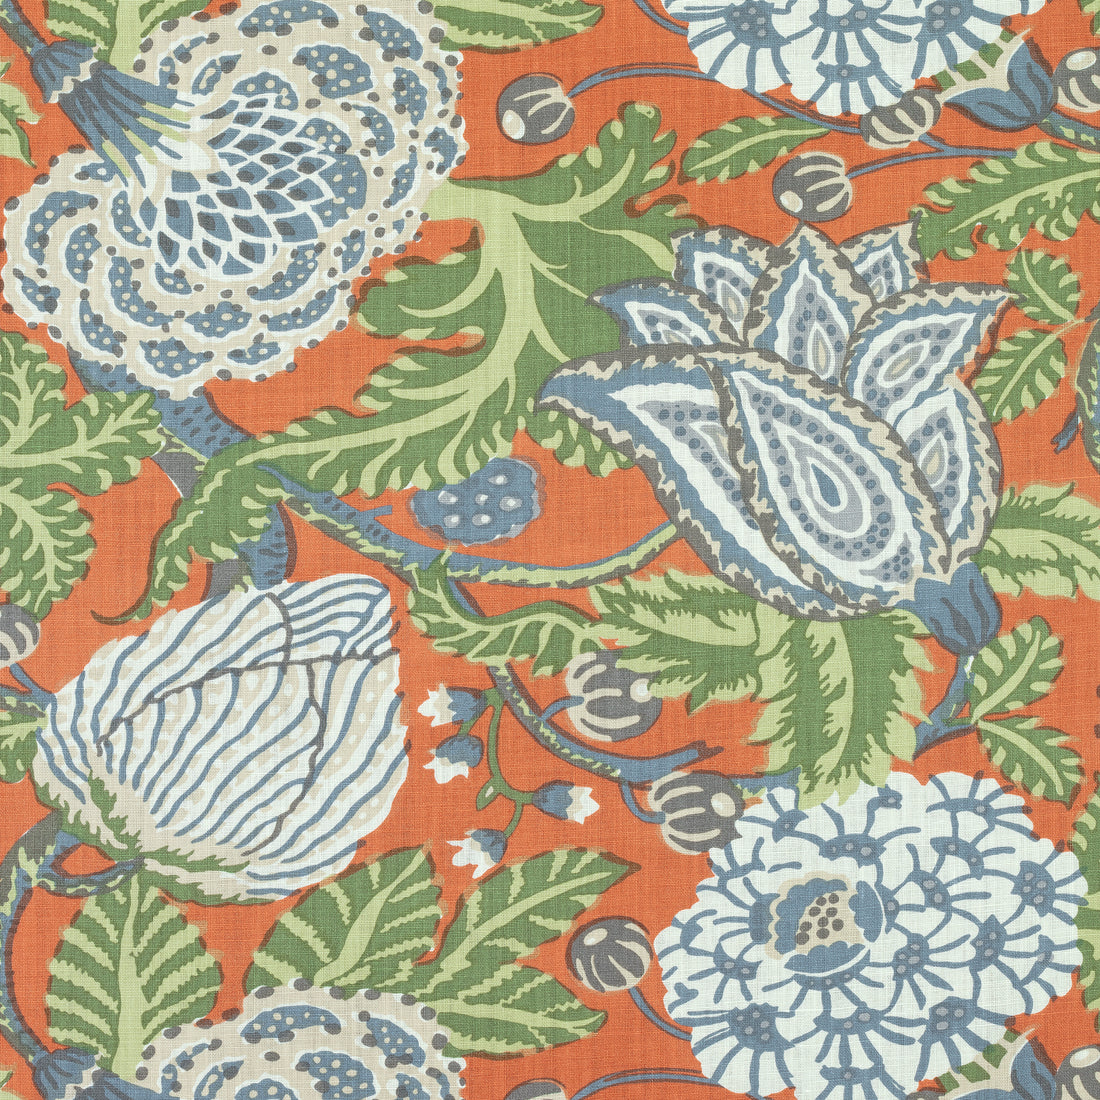 Mitford fabric in orange color - pattern number F92945 - by Thibaut in the Paramount collection